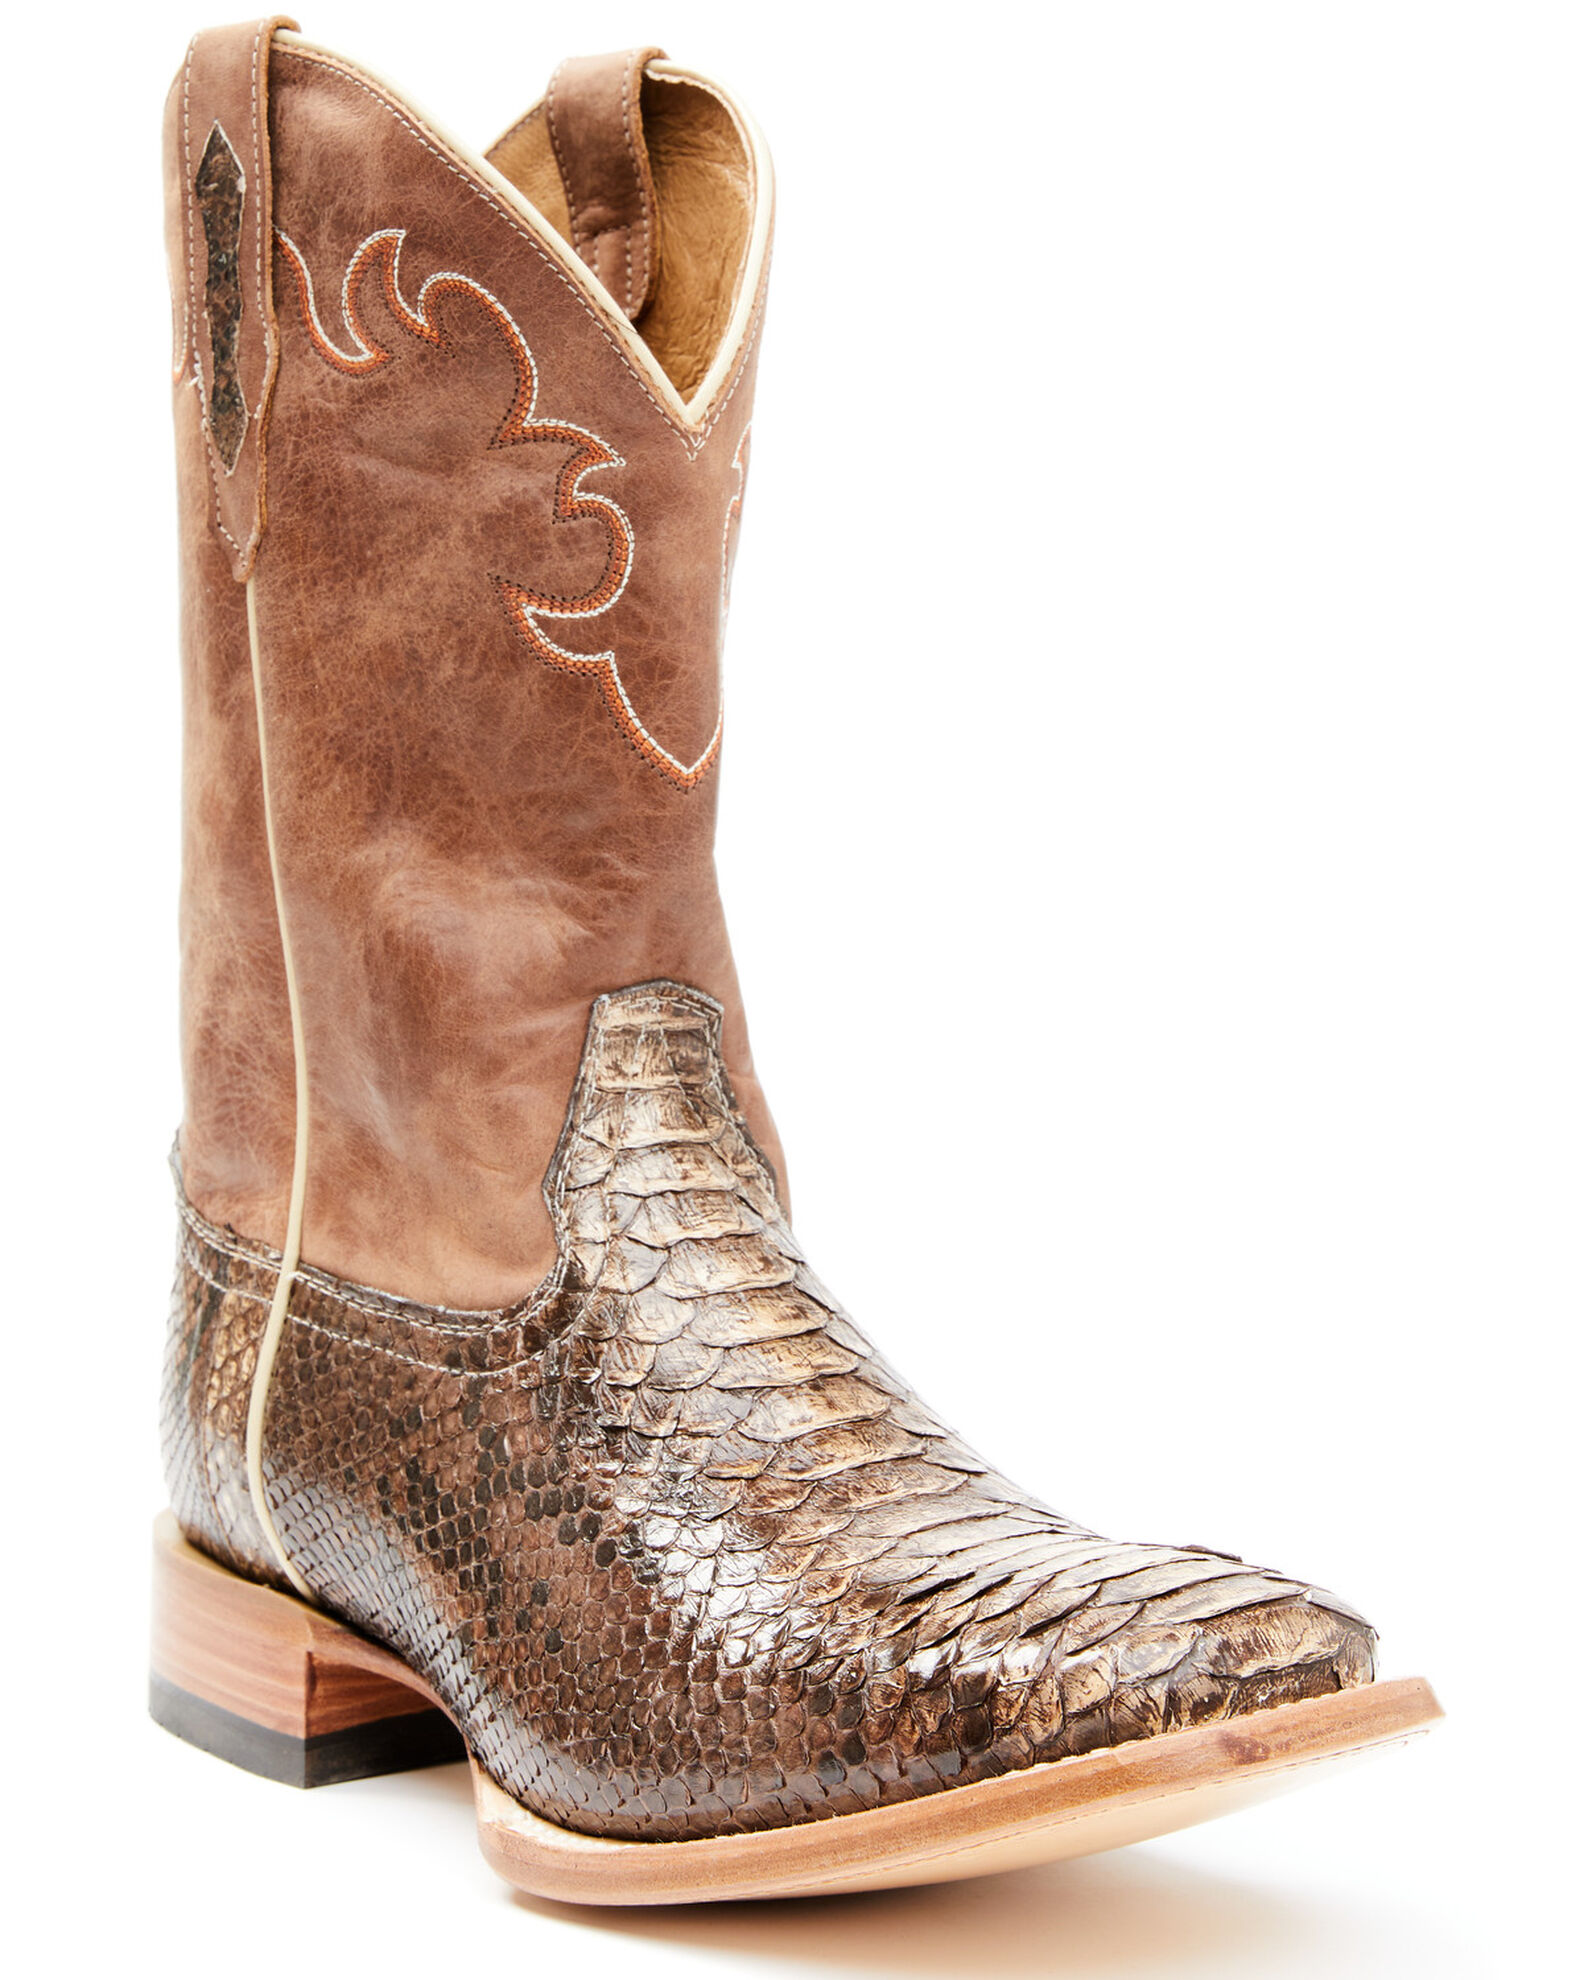 Underline napkin Beforehand Cody James Men's Exotic Python Western Boots - Broad Square Toe - Country  Outfitter